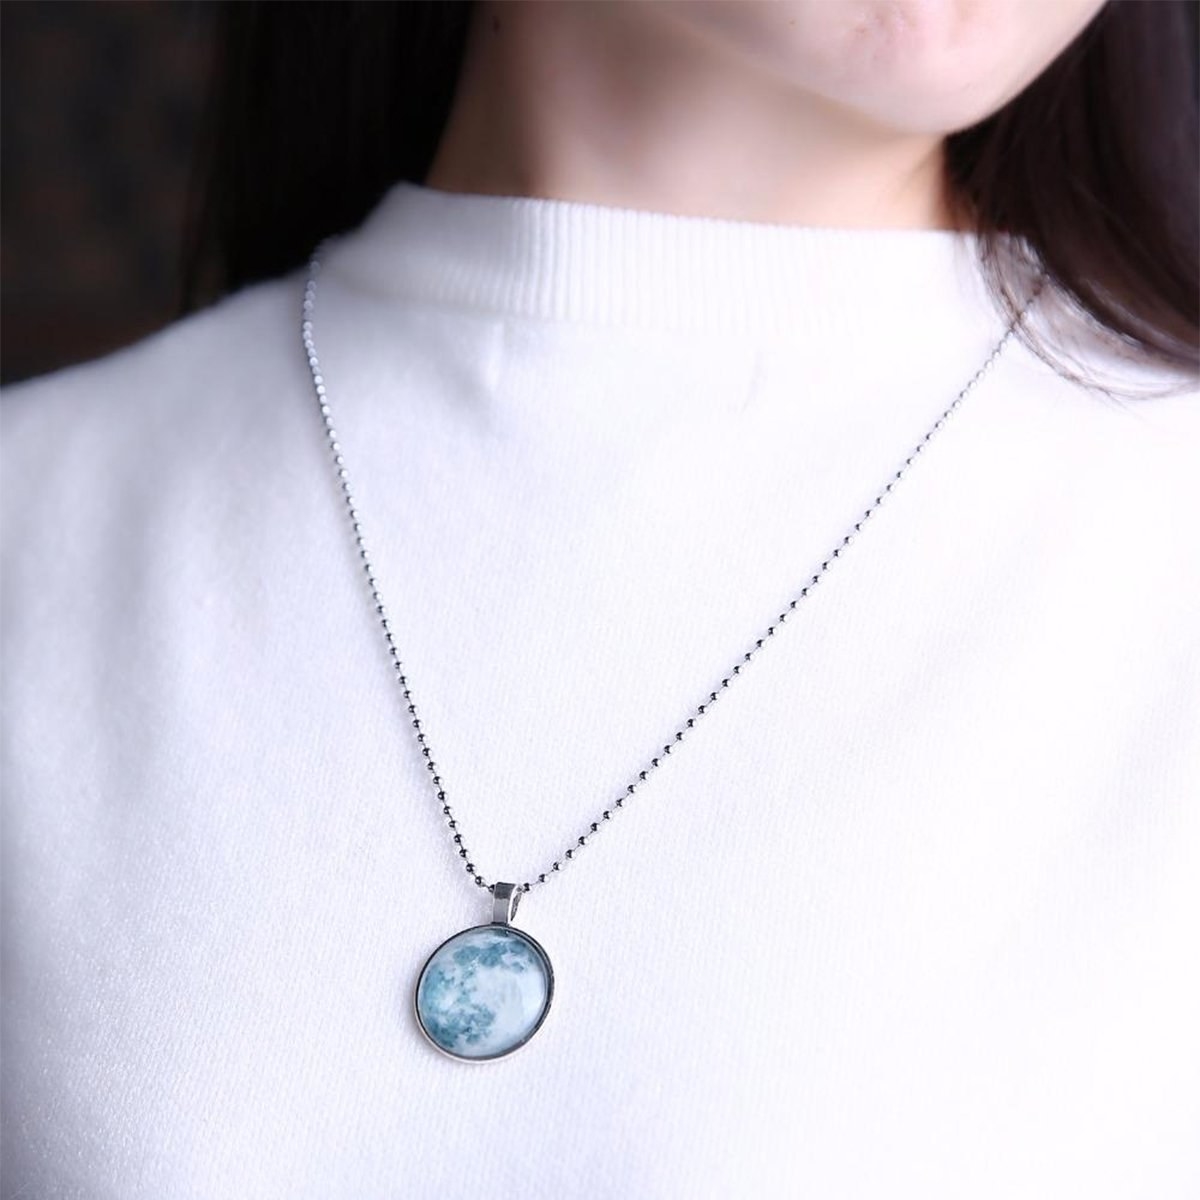 A woman wearing a moon pendant necklace.